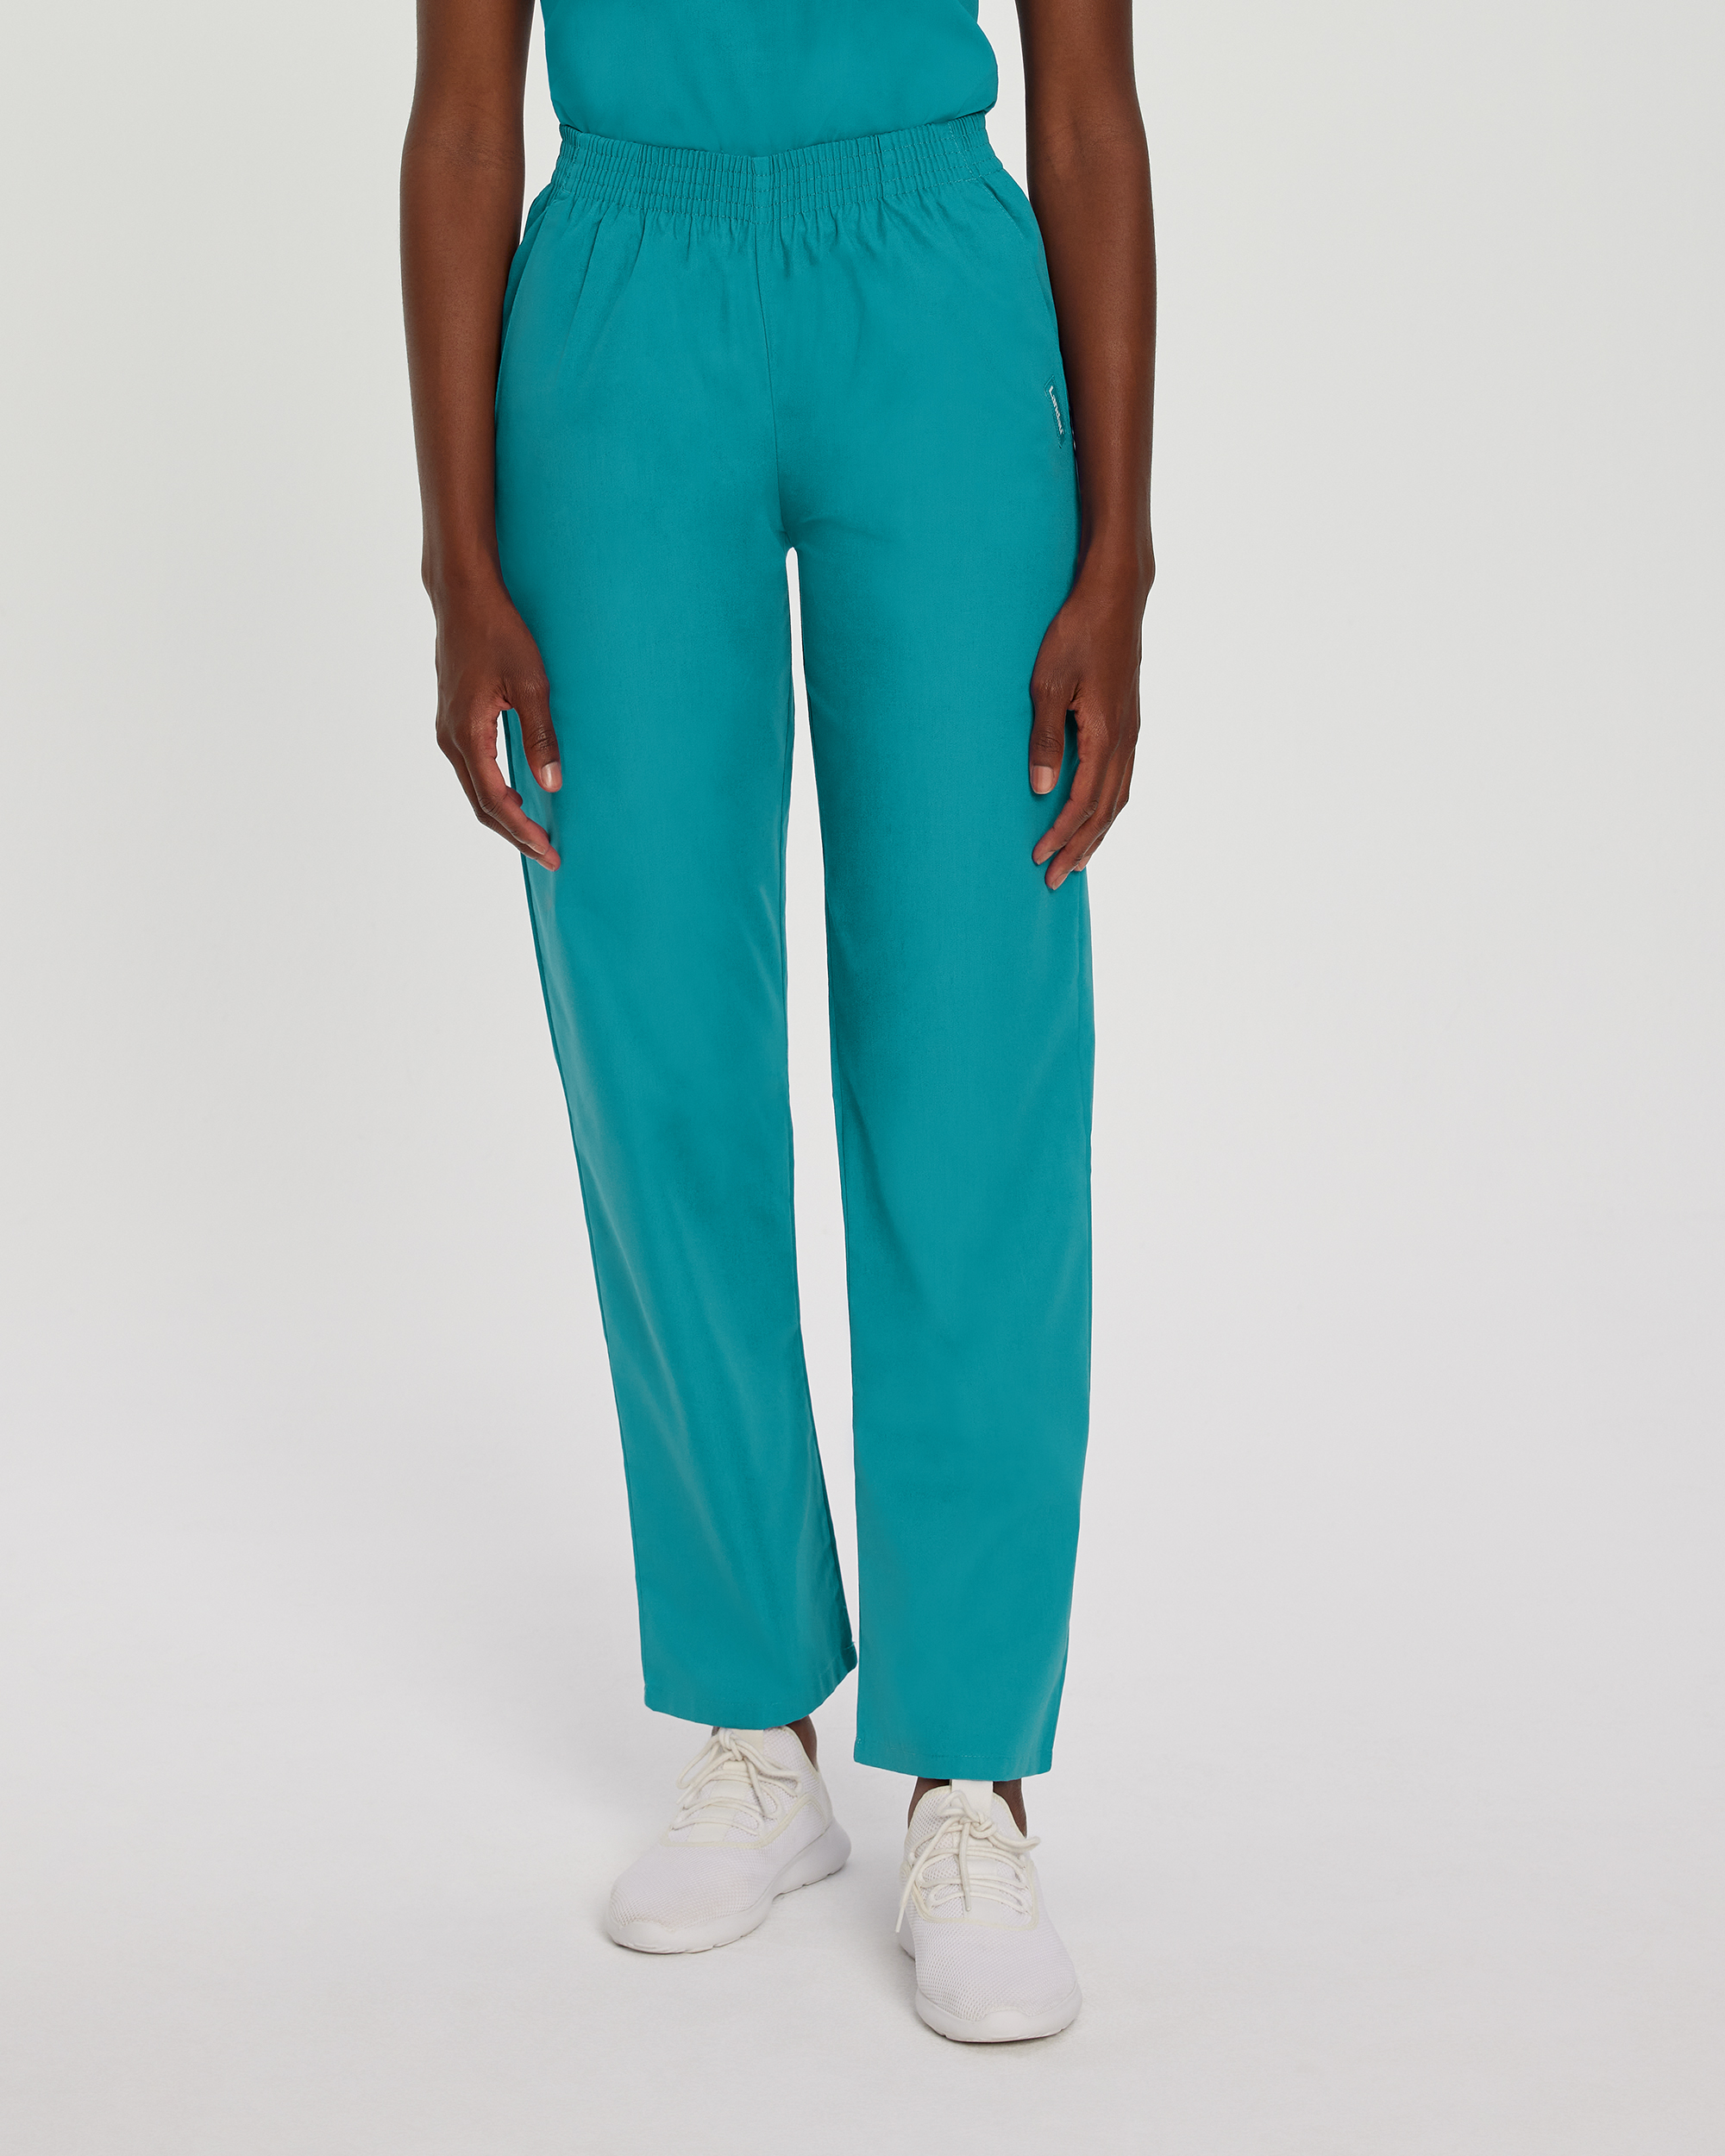 Landau Essentials Scrub Pants for Women: Classic Relaxed Fit Pull-on with Elastic Waist, Straight Leg, 2 Pockets 8327 Questions & Answers